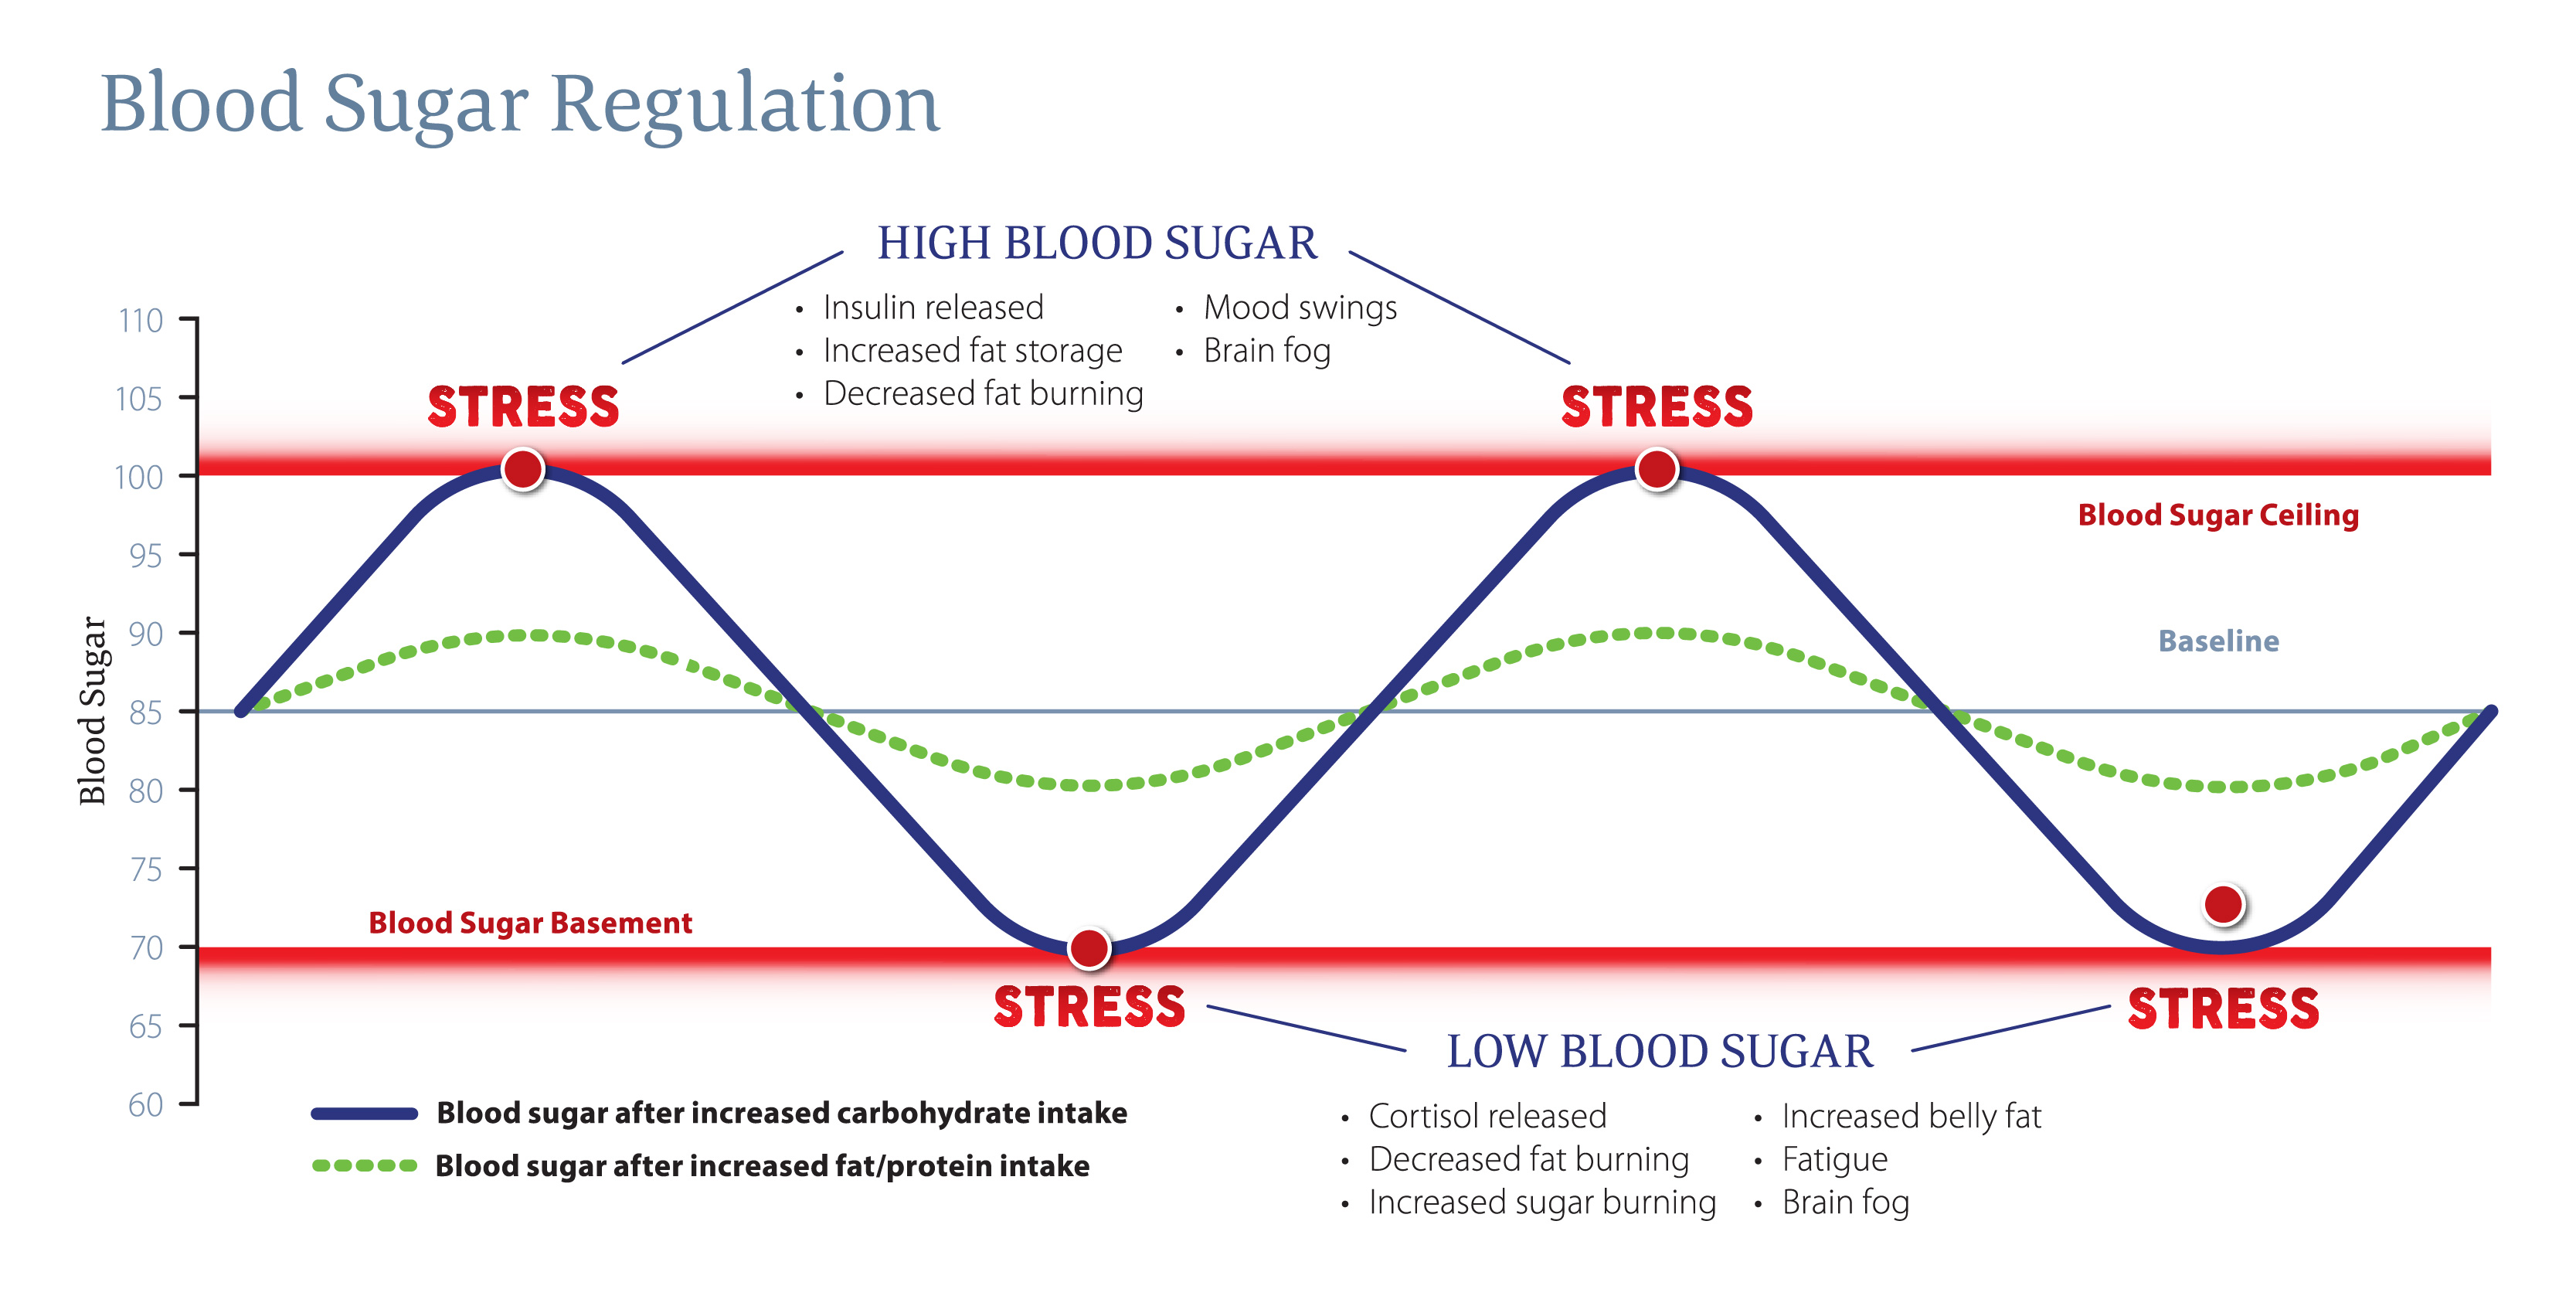 Stress and blood sugar levels